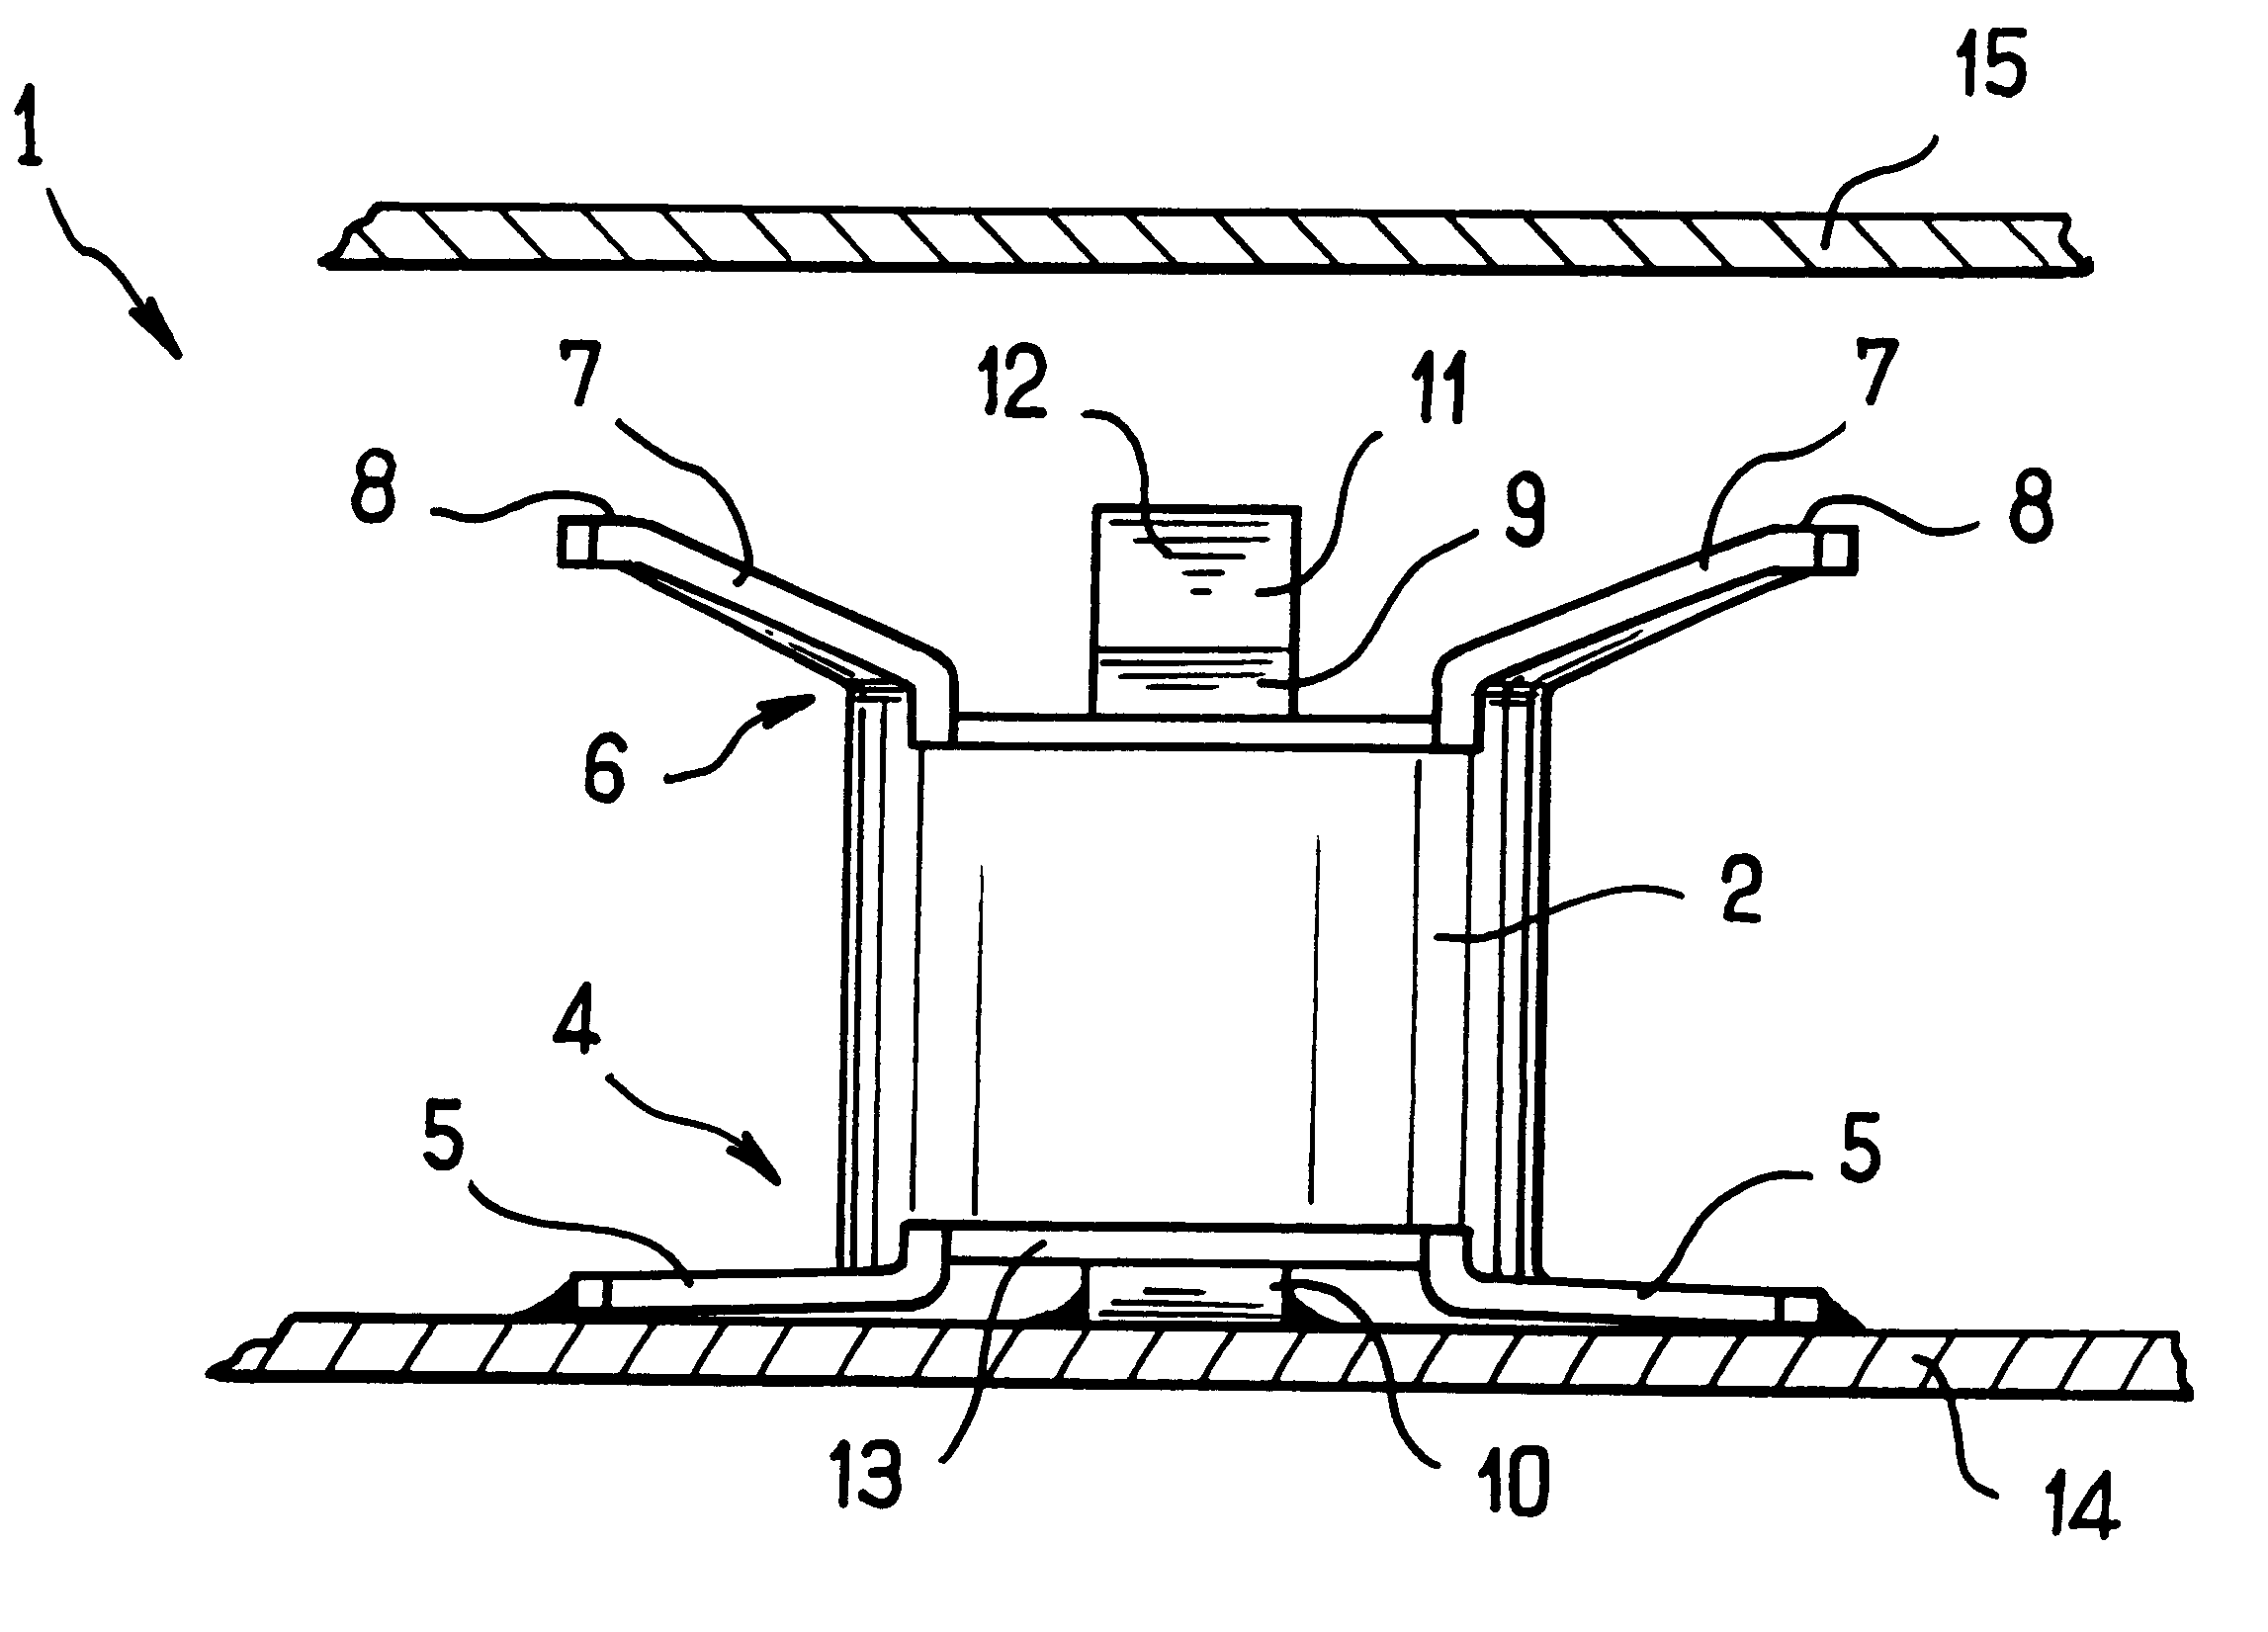 Coaxial coupling for interconnecting two printed circuit cards